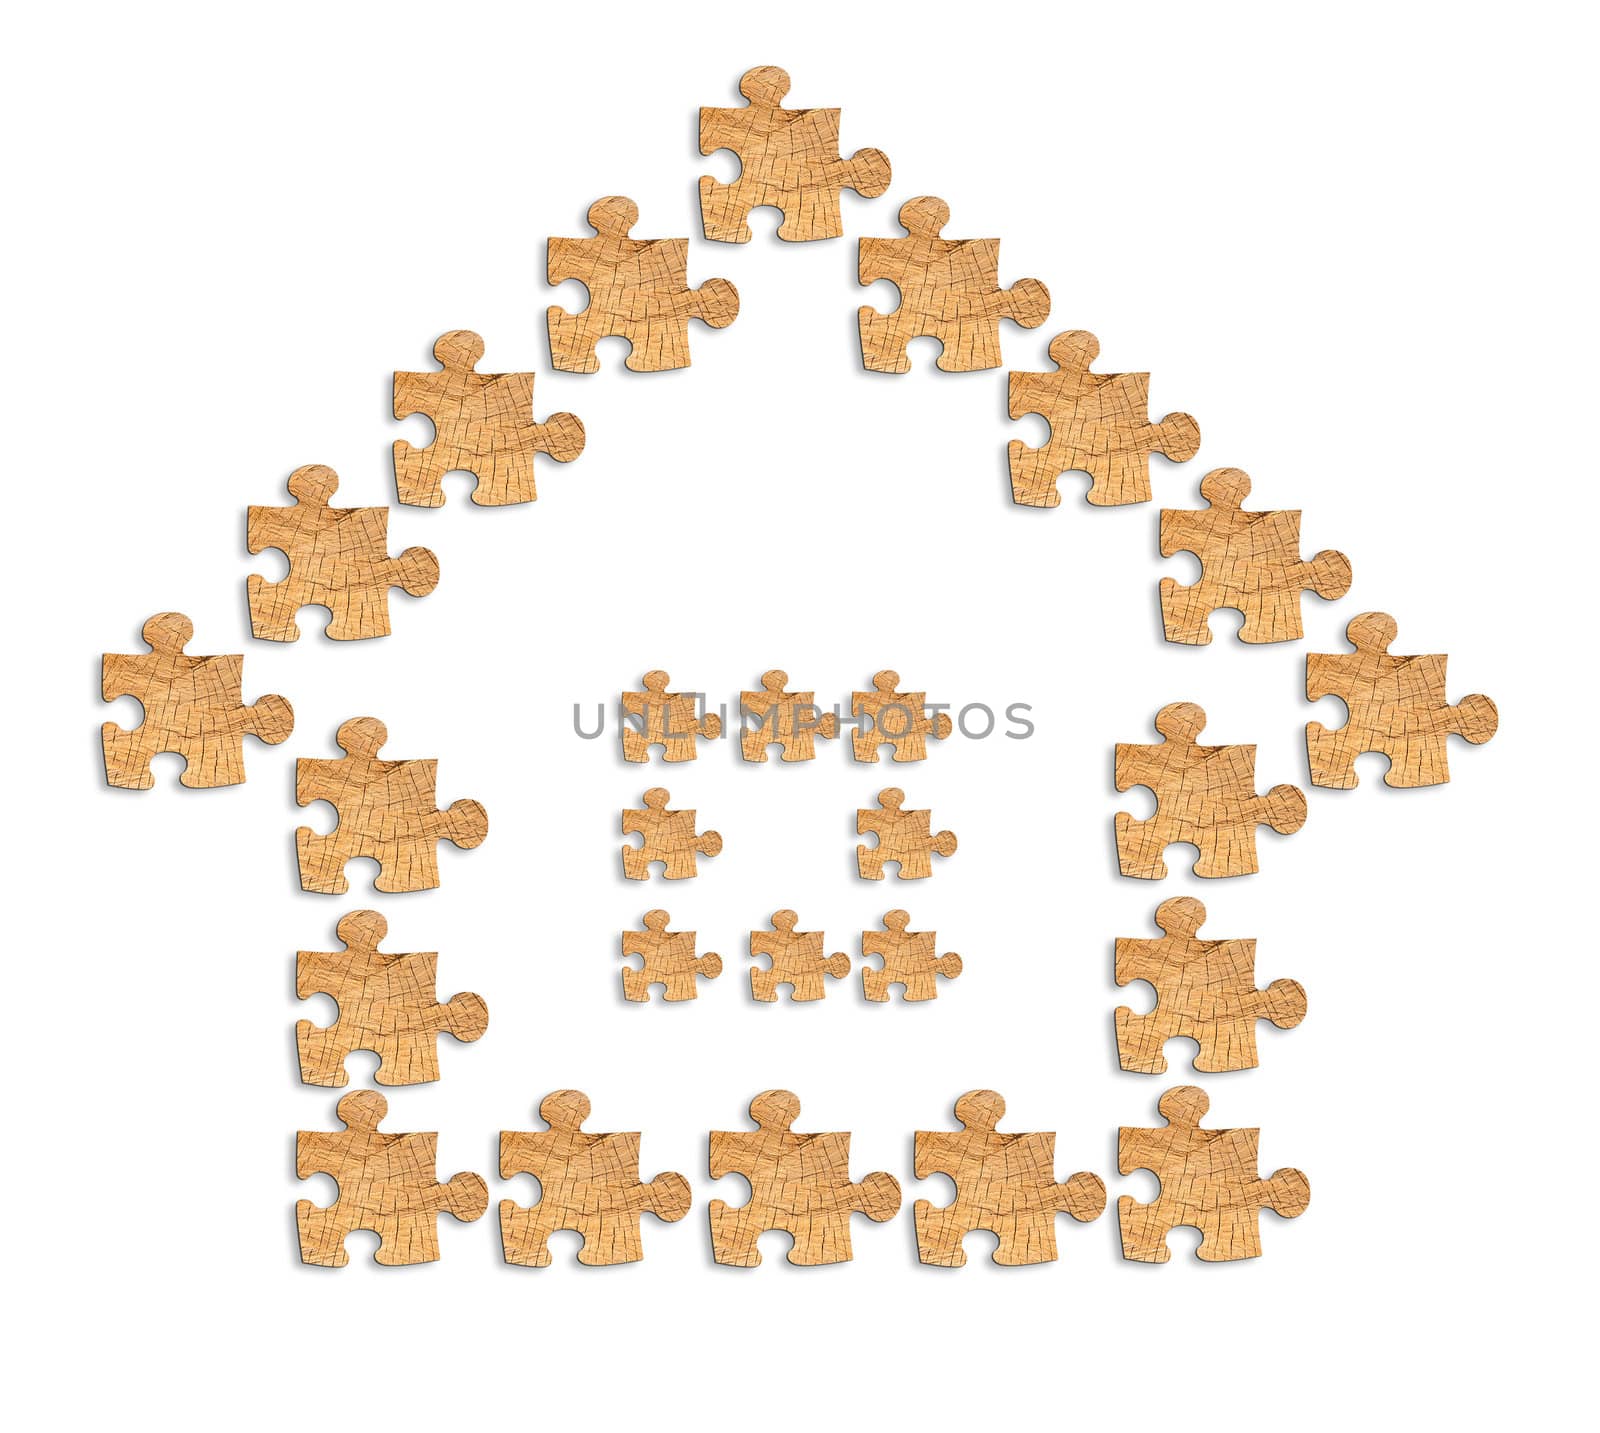 image of a house made of wooden figures puzzles with Clipping Path